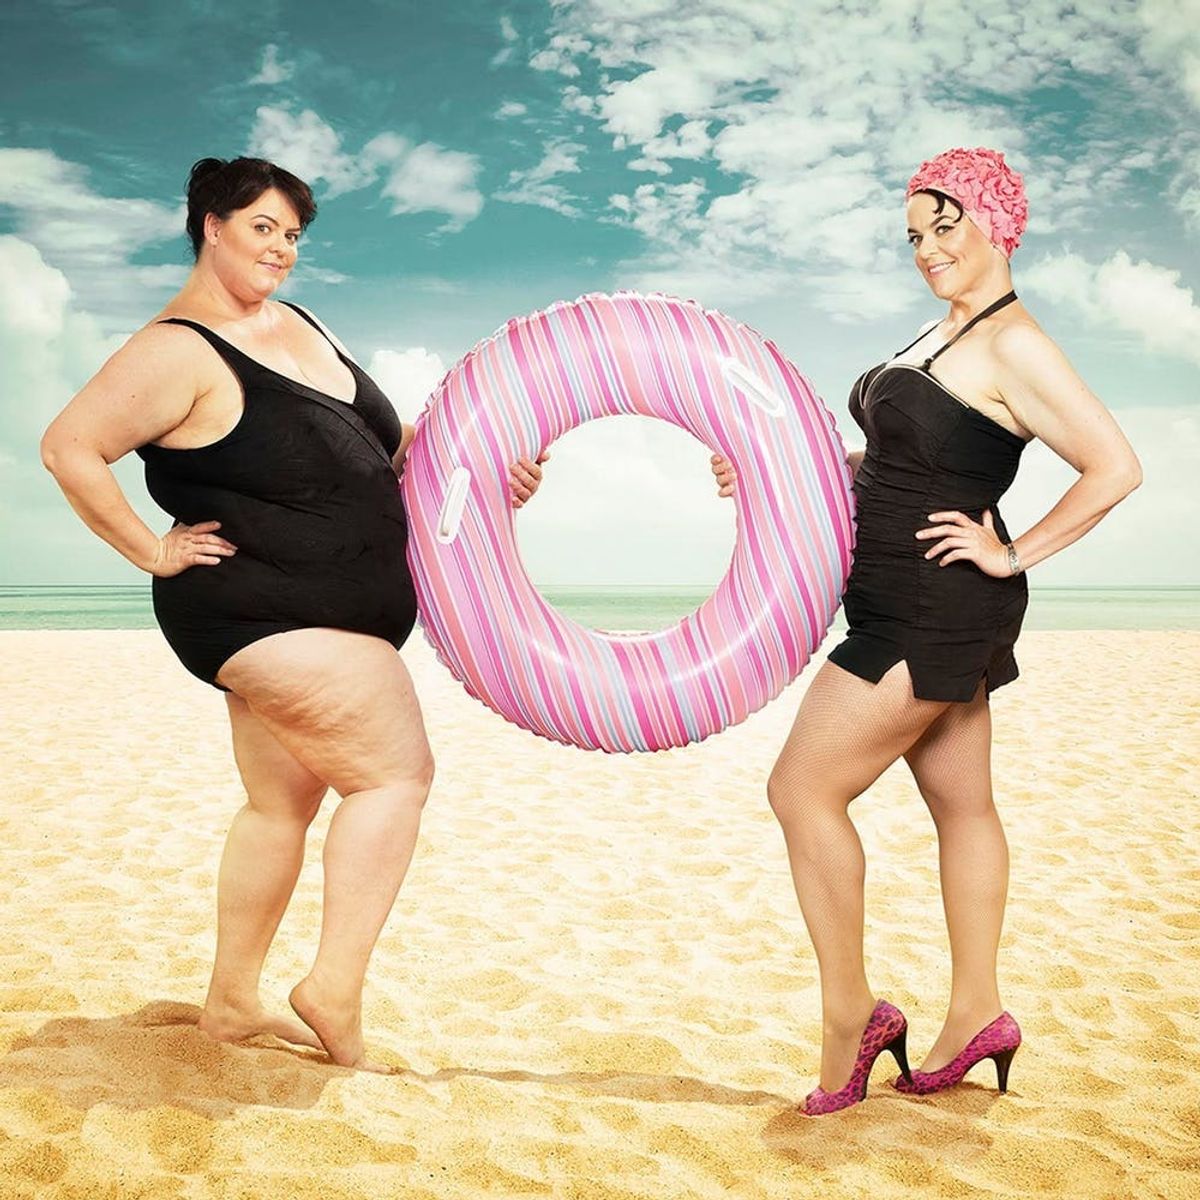 View the Most Creative Before + After Weight Loss Photo Series EVER